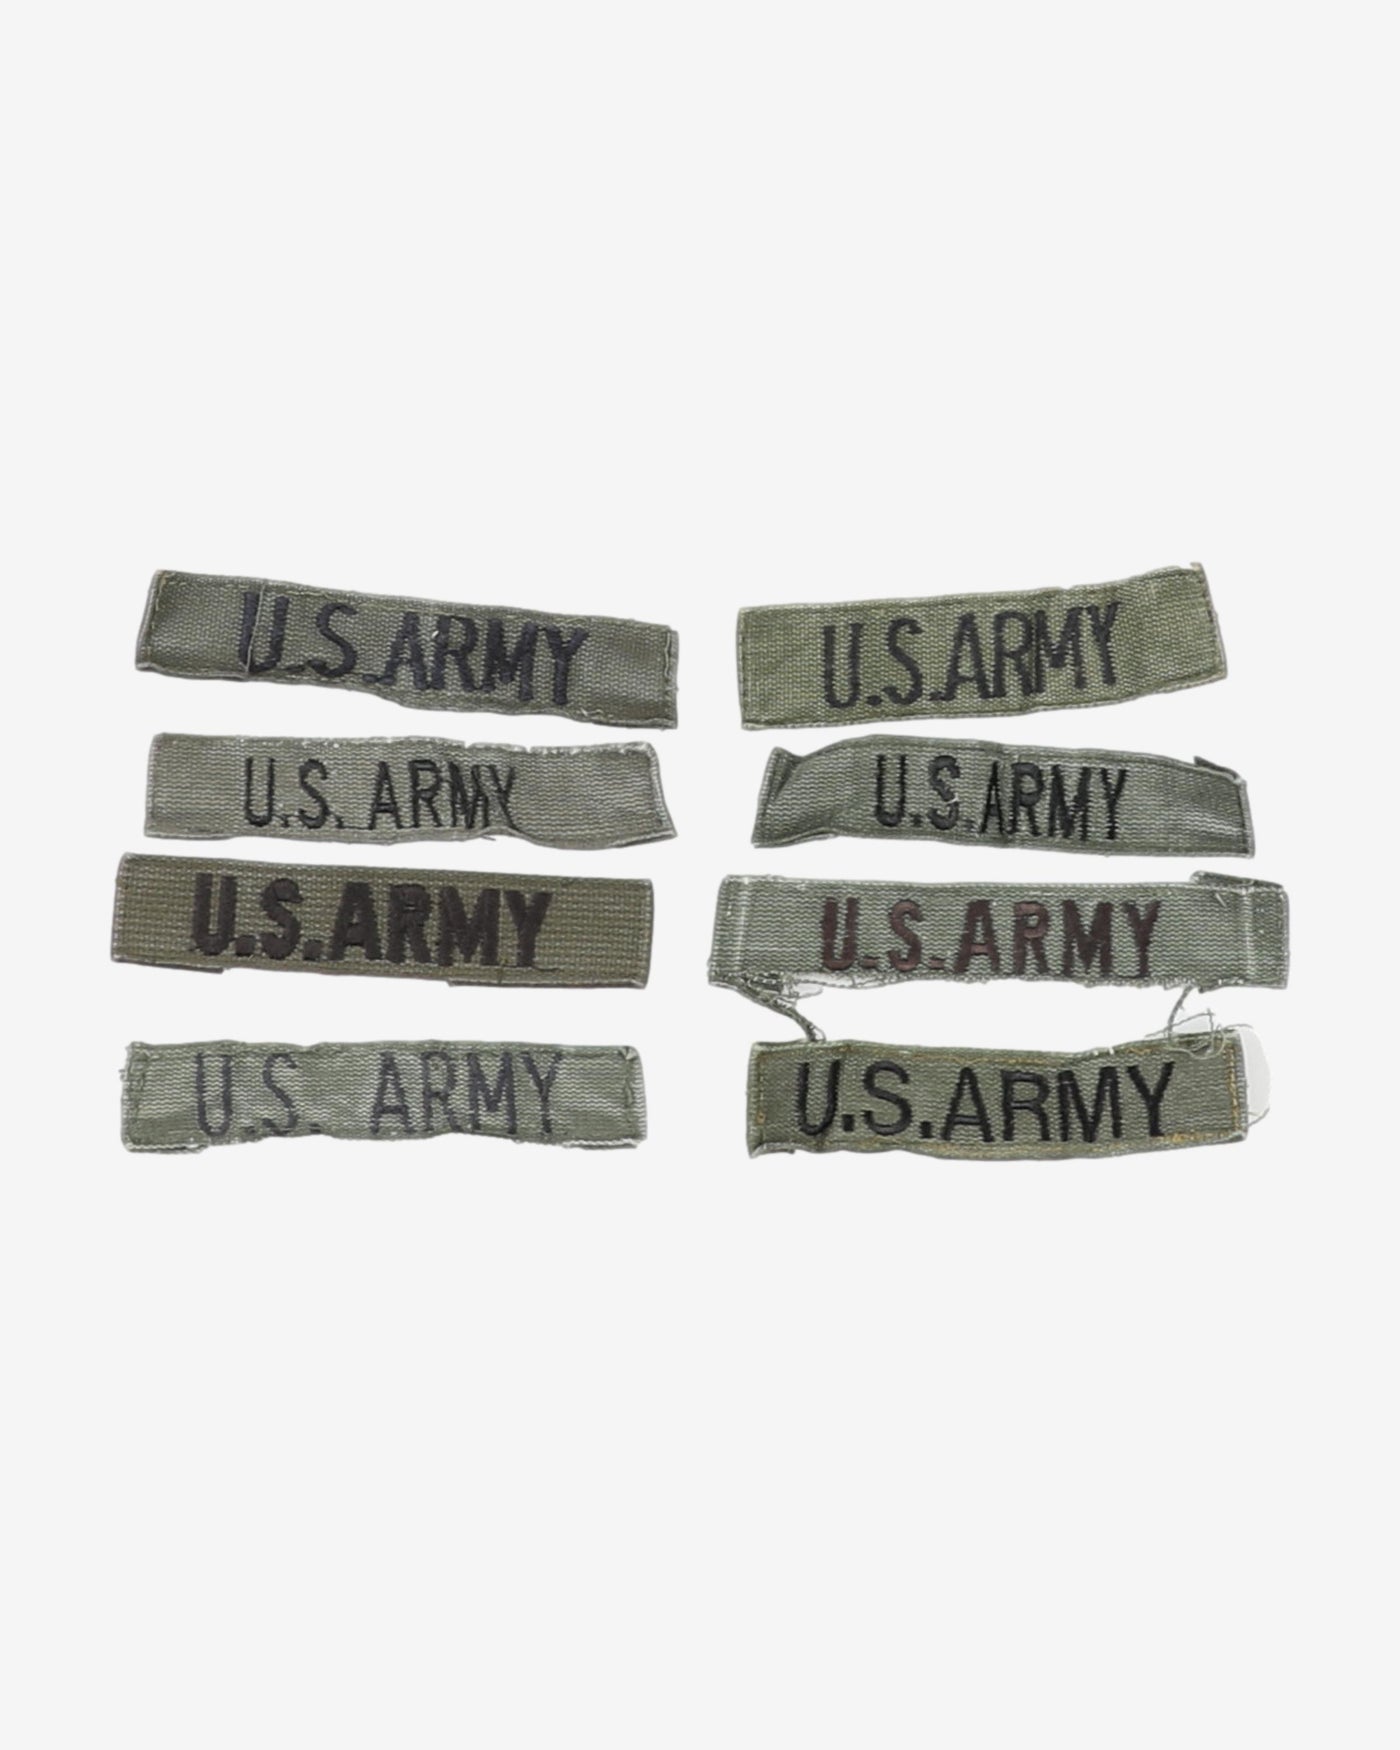 1x Genuine Uniform Removed OD Green US Army Branch Tape Patch